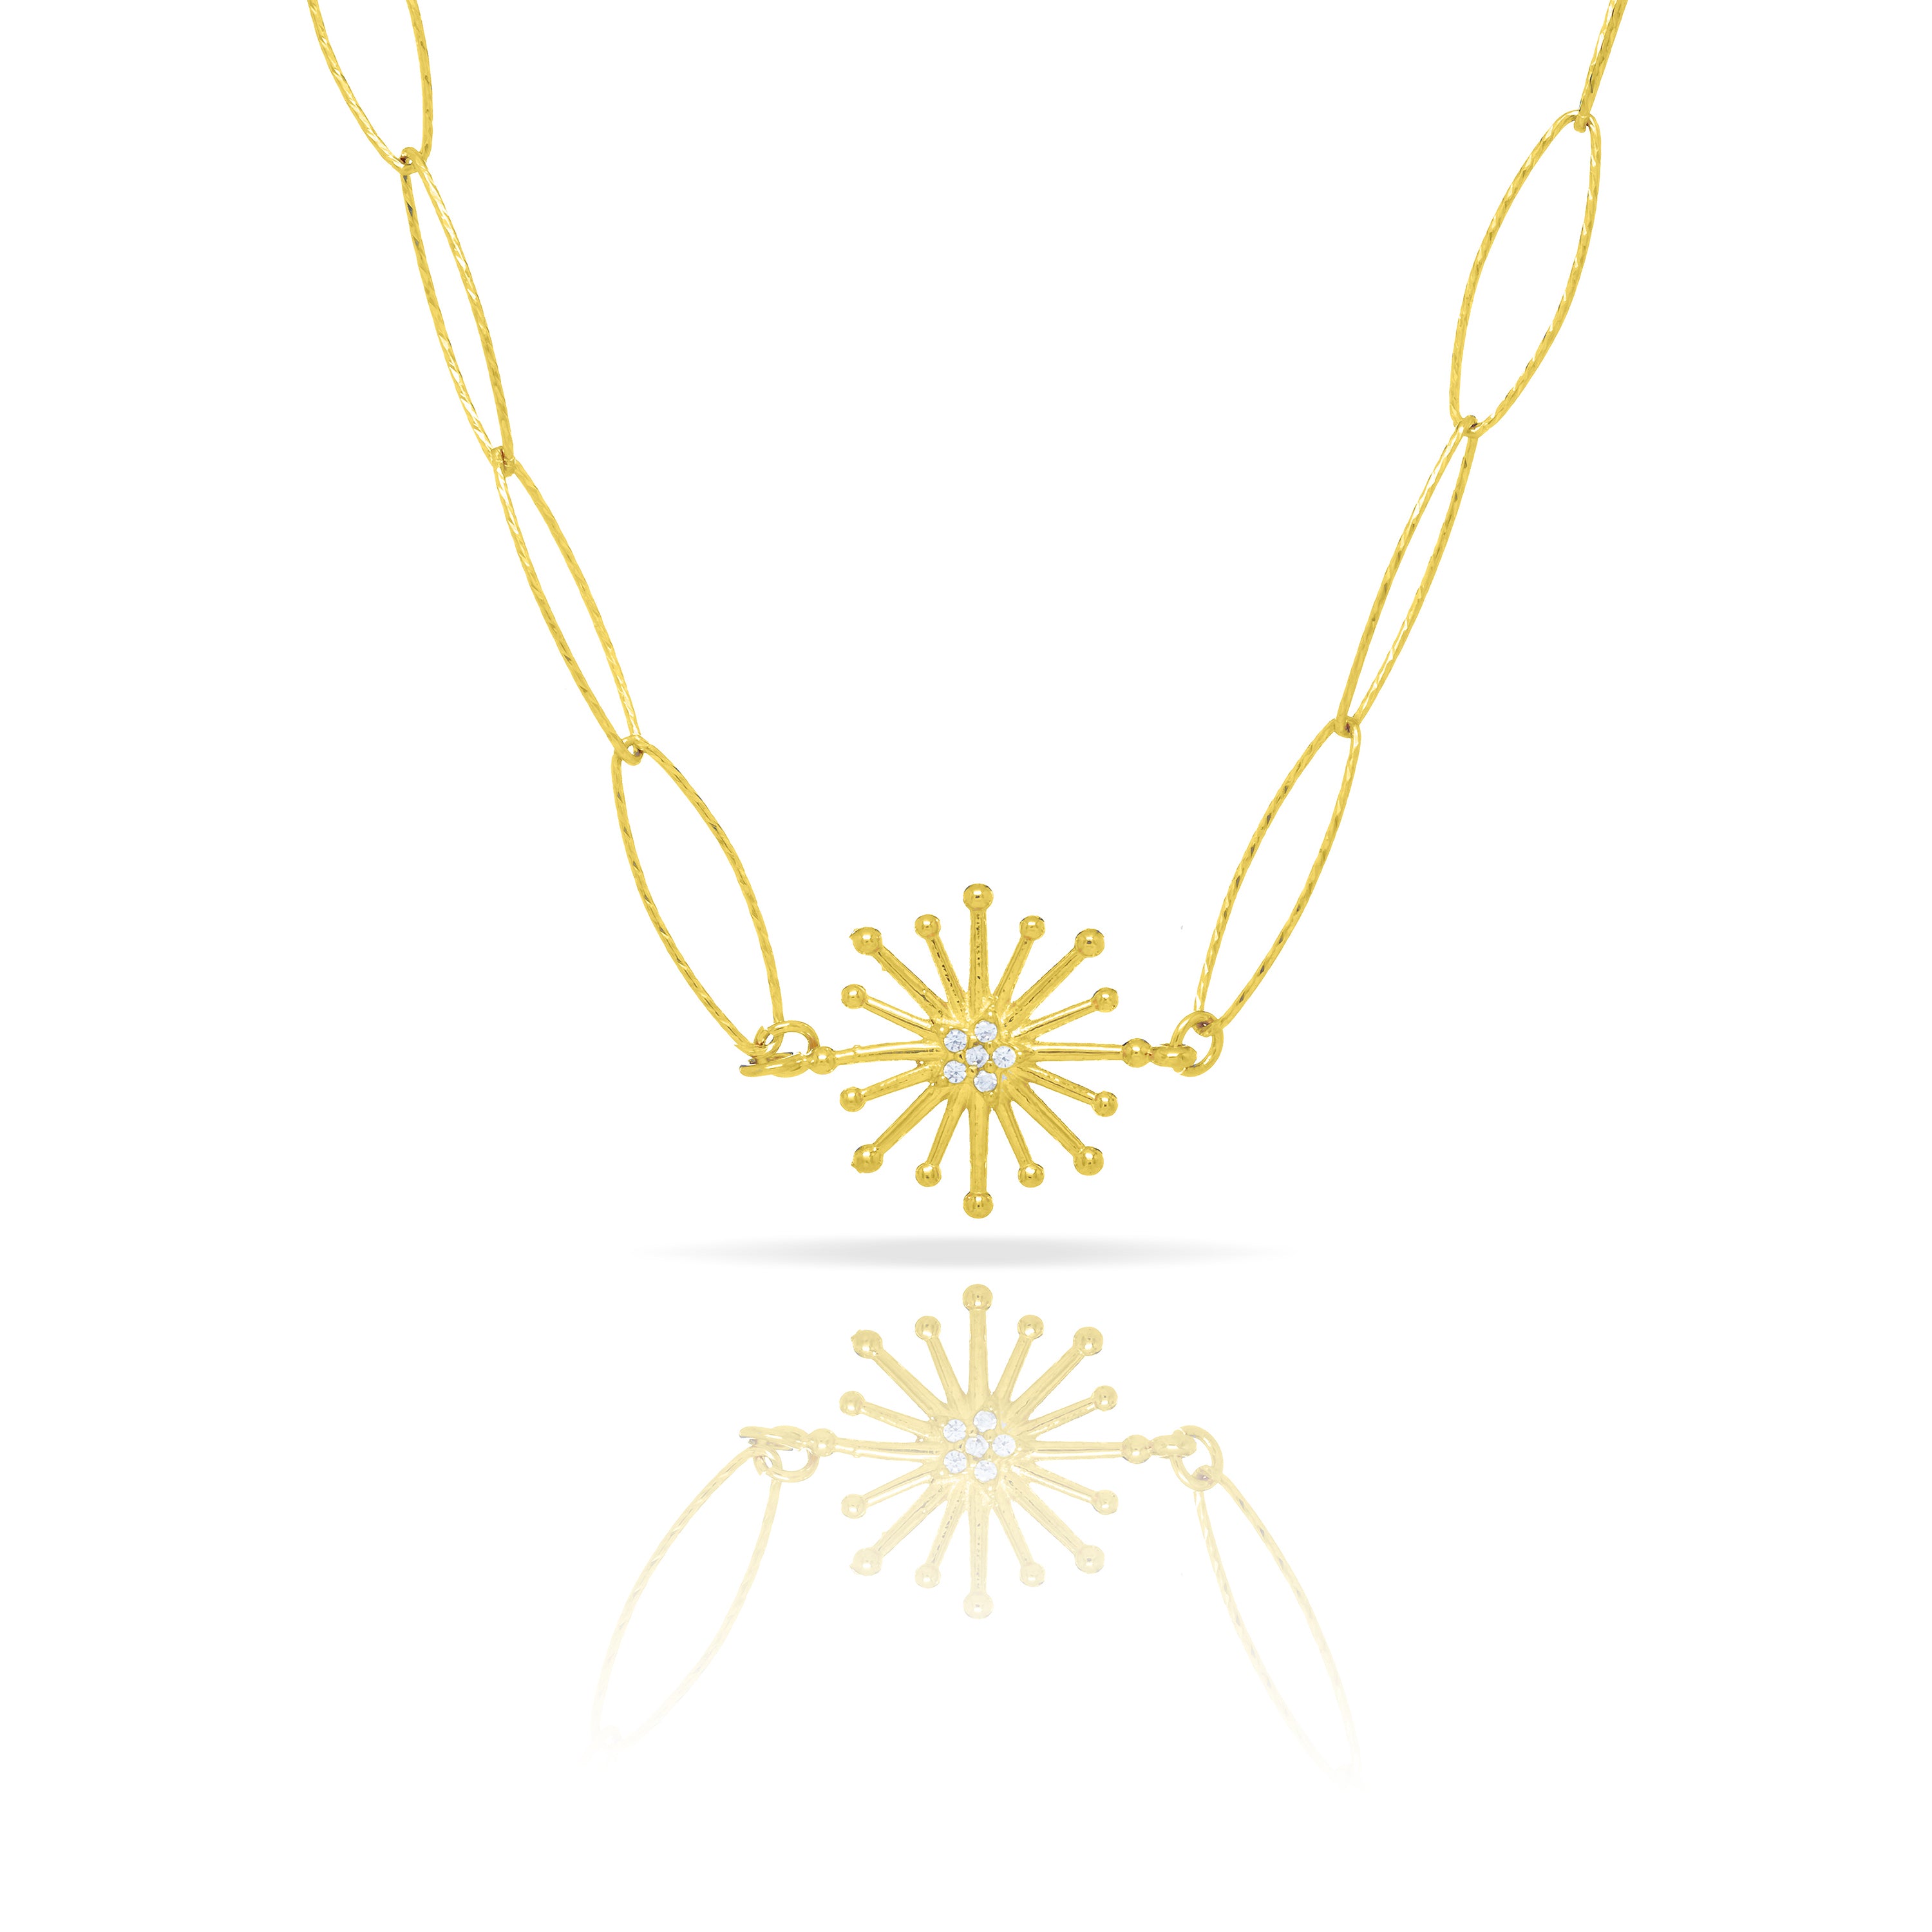 Starburst Oval Chain Necklace